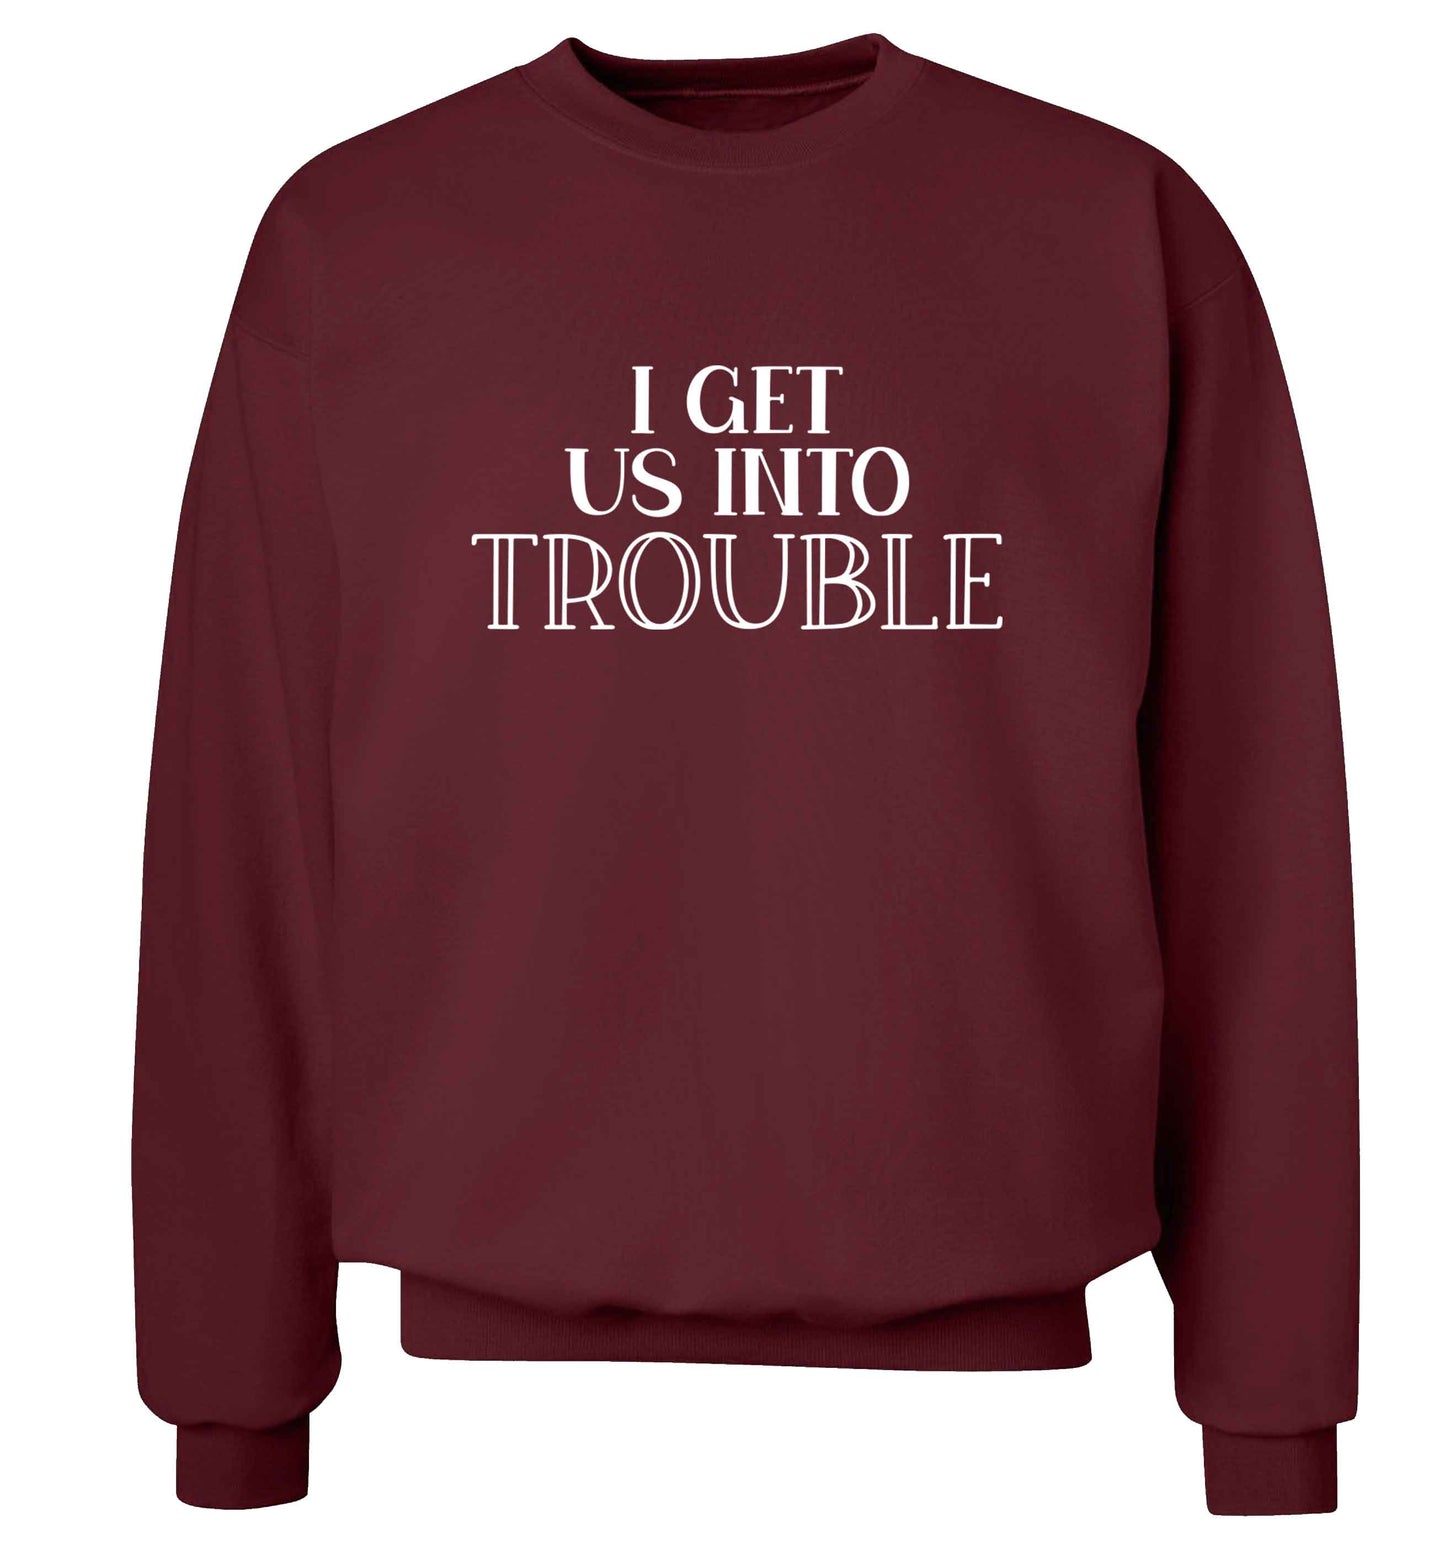 I get us into trouble adult's unisex maroon sweater 2XL